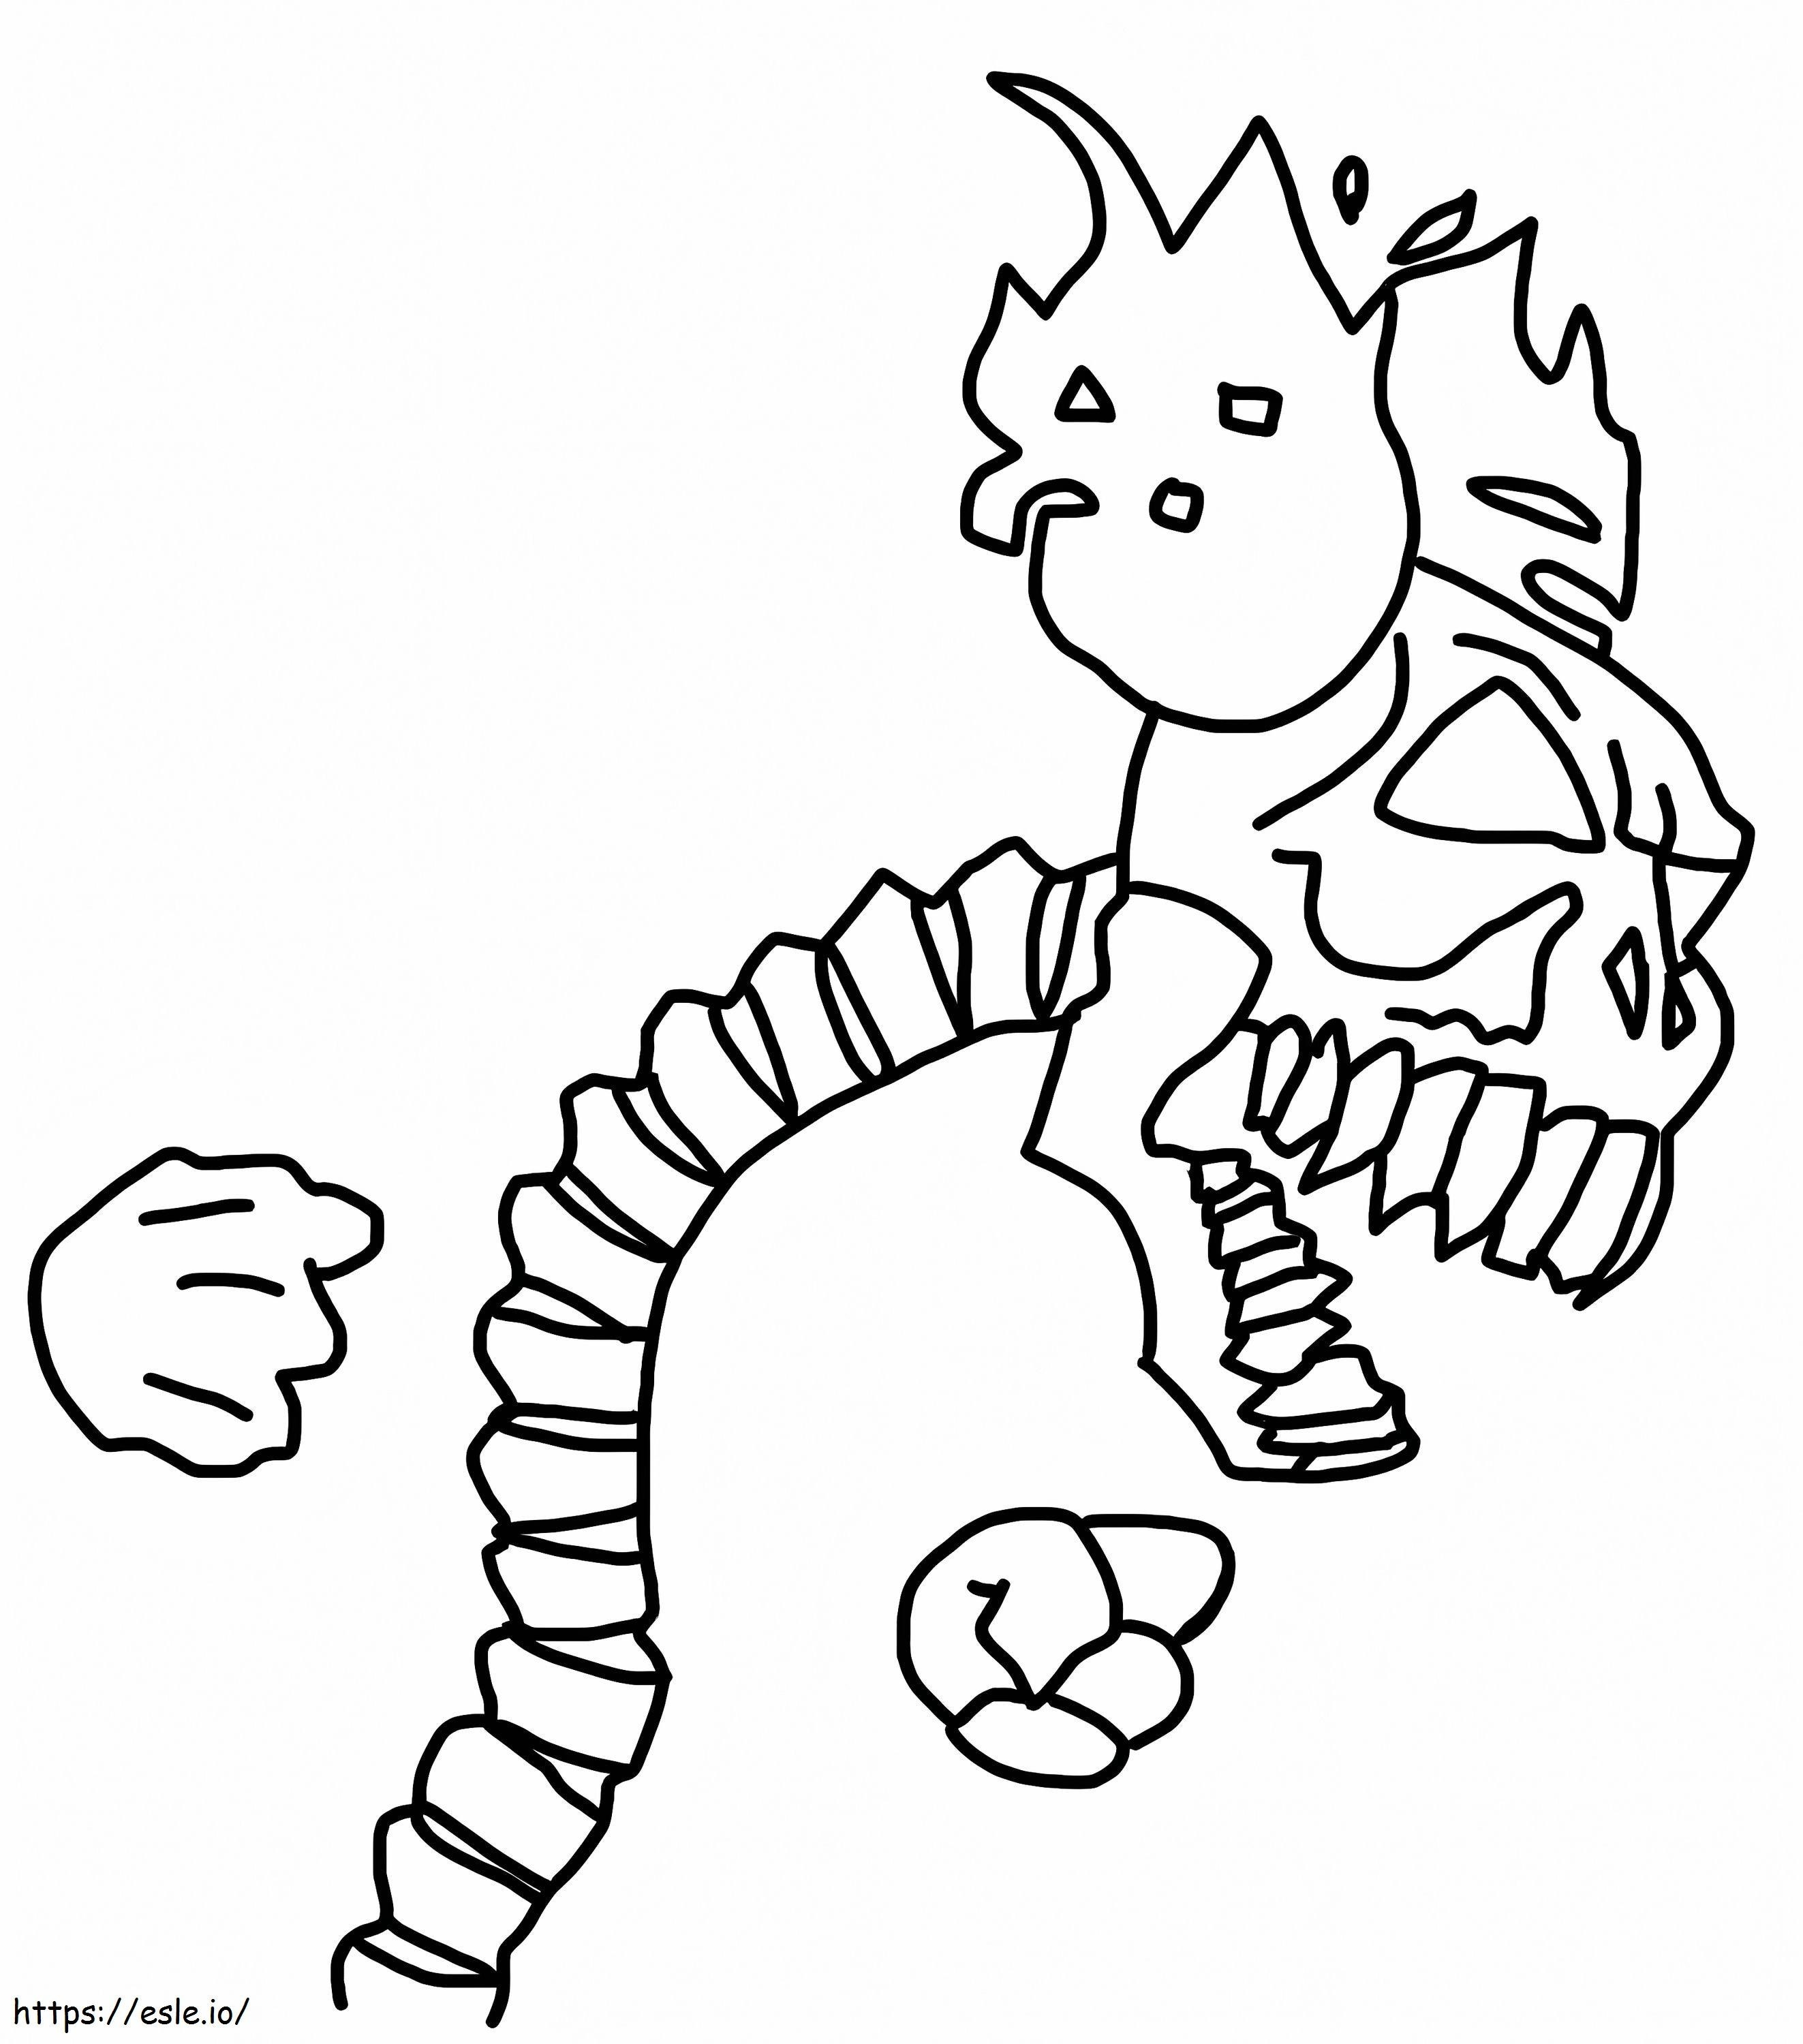 Tricky Skeleton Madness Combat coloring page